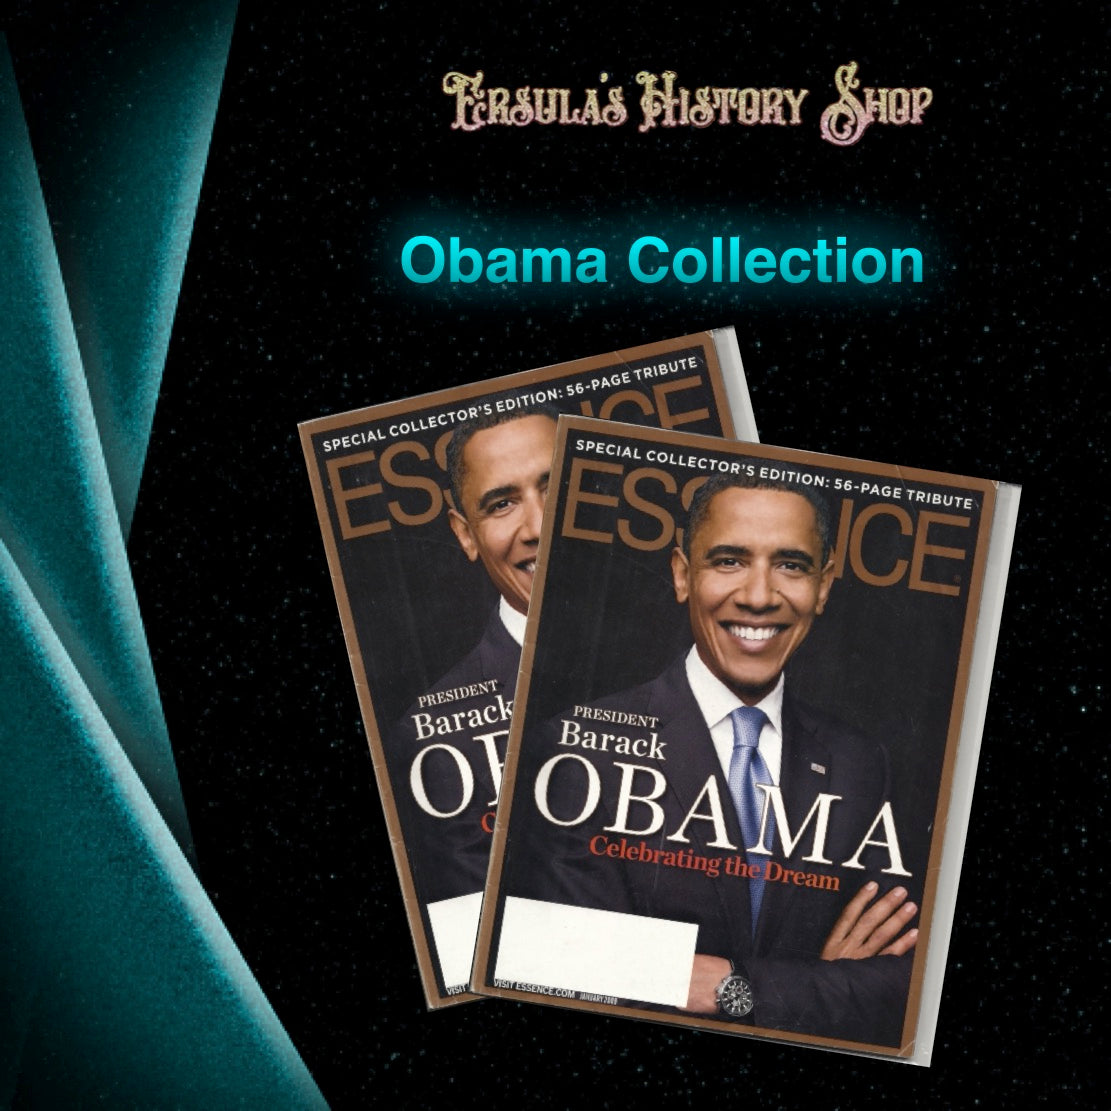 OBAMA COLLECTION